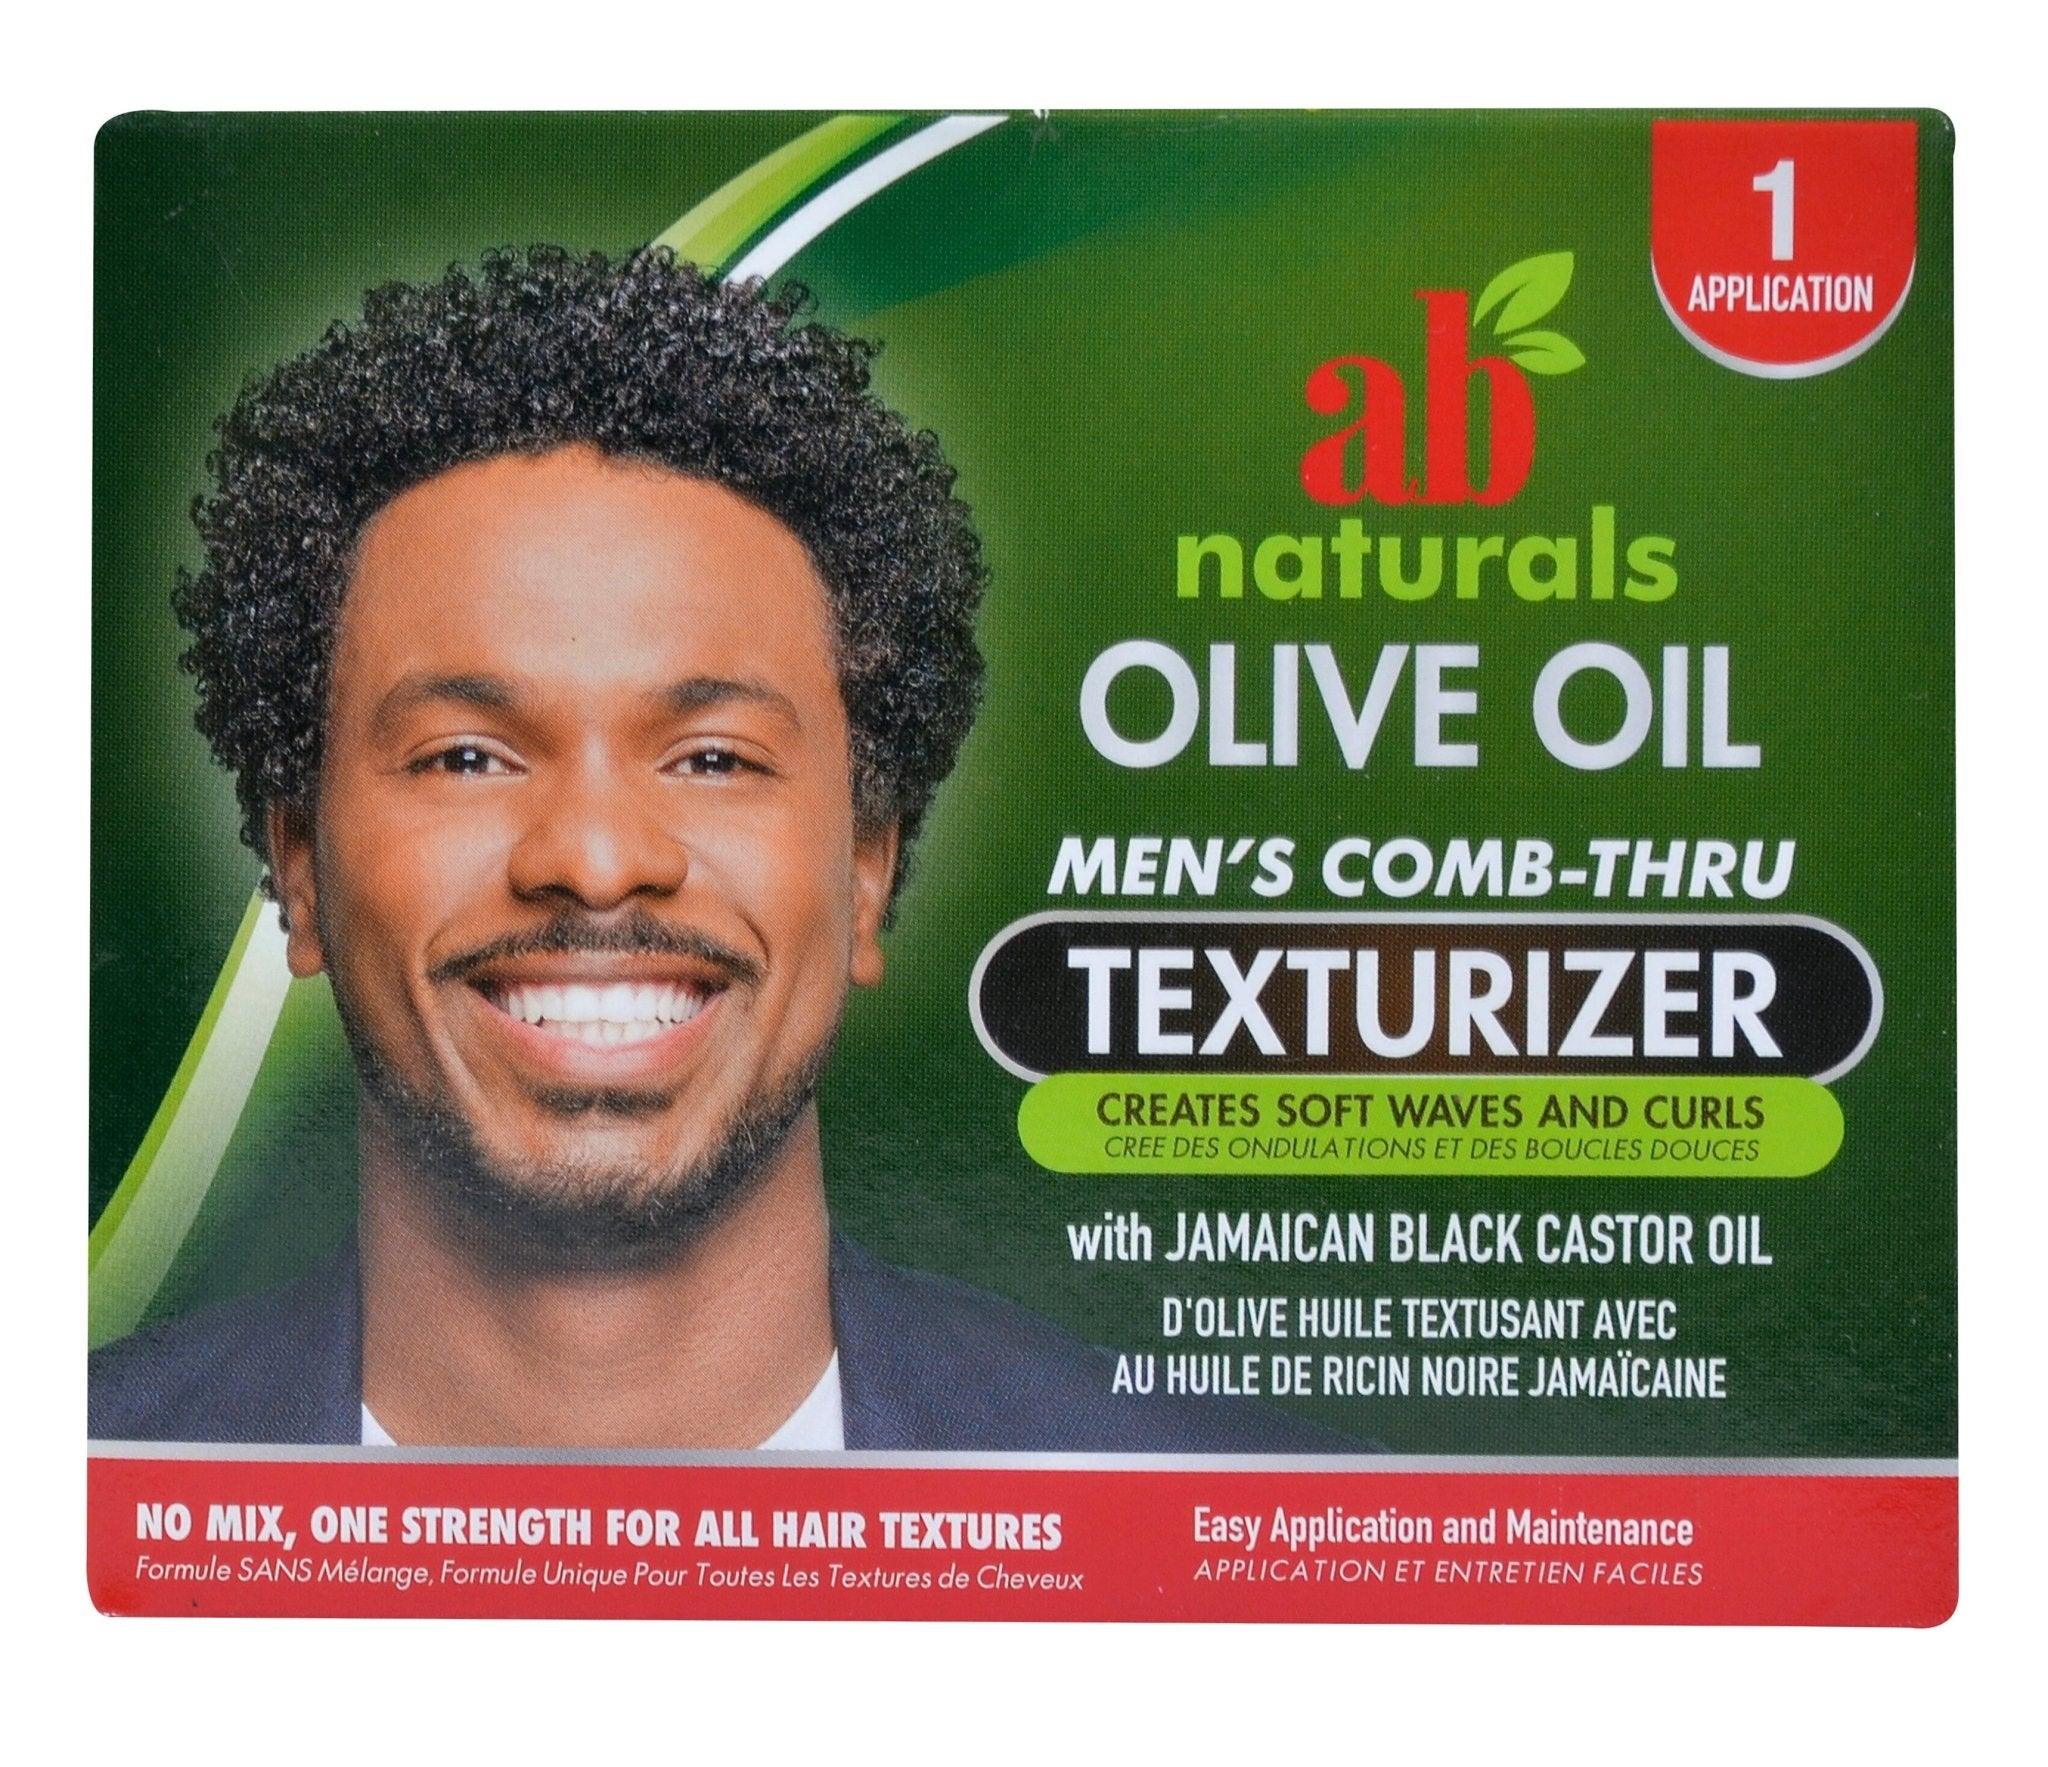 Ab Naturals Olive Oil Texturizer with Jamaican Black Castor Oil for Men - USA Beauty Imports Online